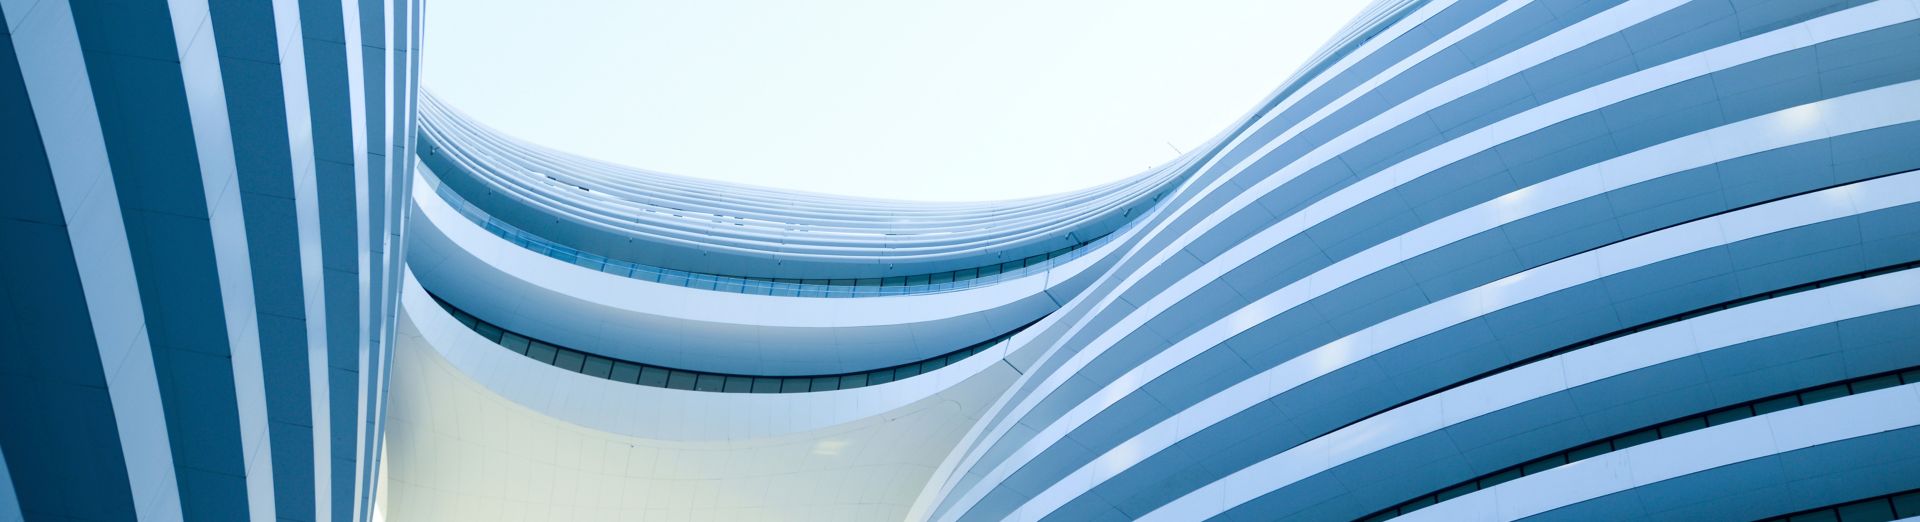 Detailed close up of the blue wave terraces of a building